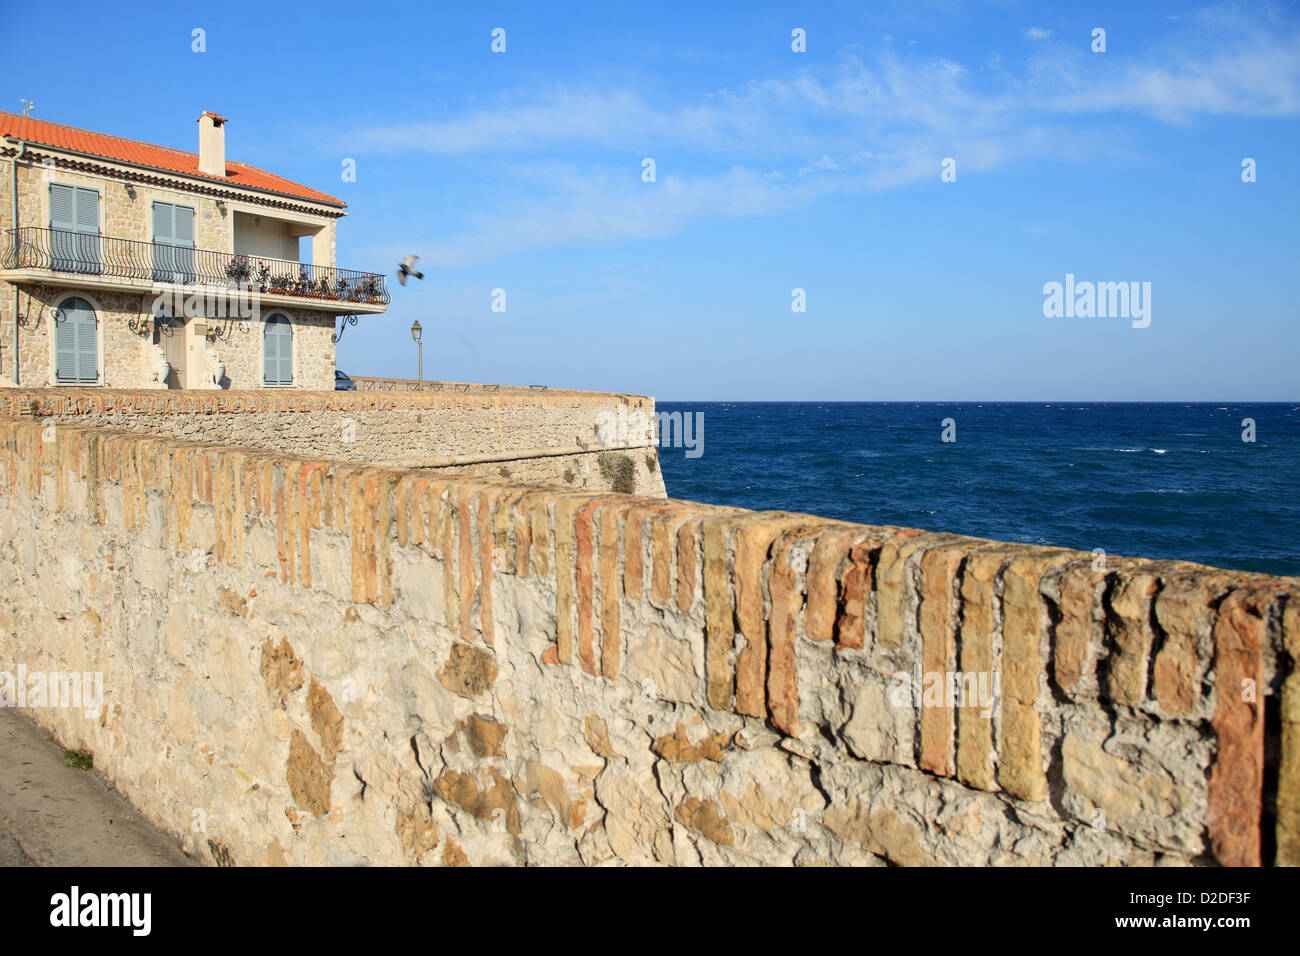 The city of Antibes in the French Riviera Stock Photo